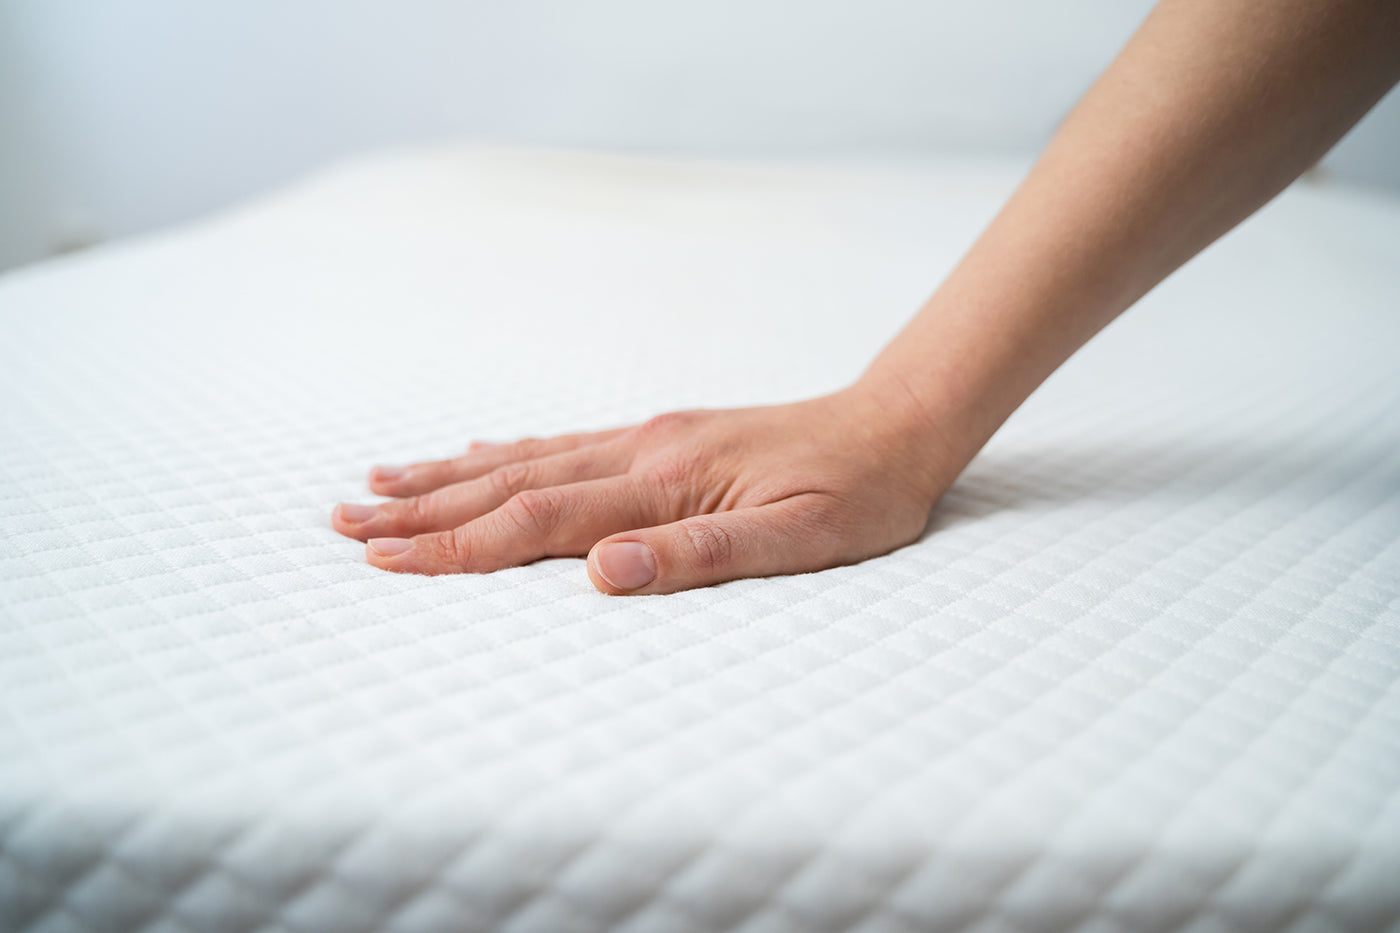 The Purple Mattress Competitor To Keep Your Eye On